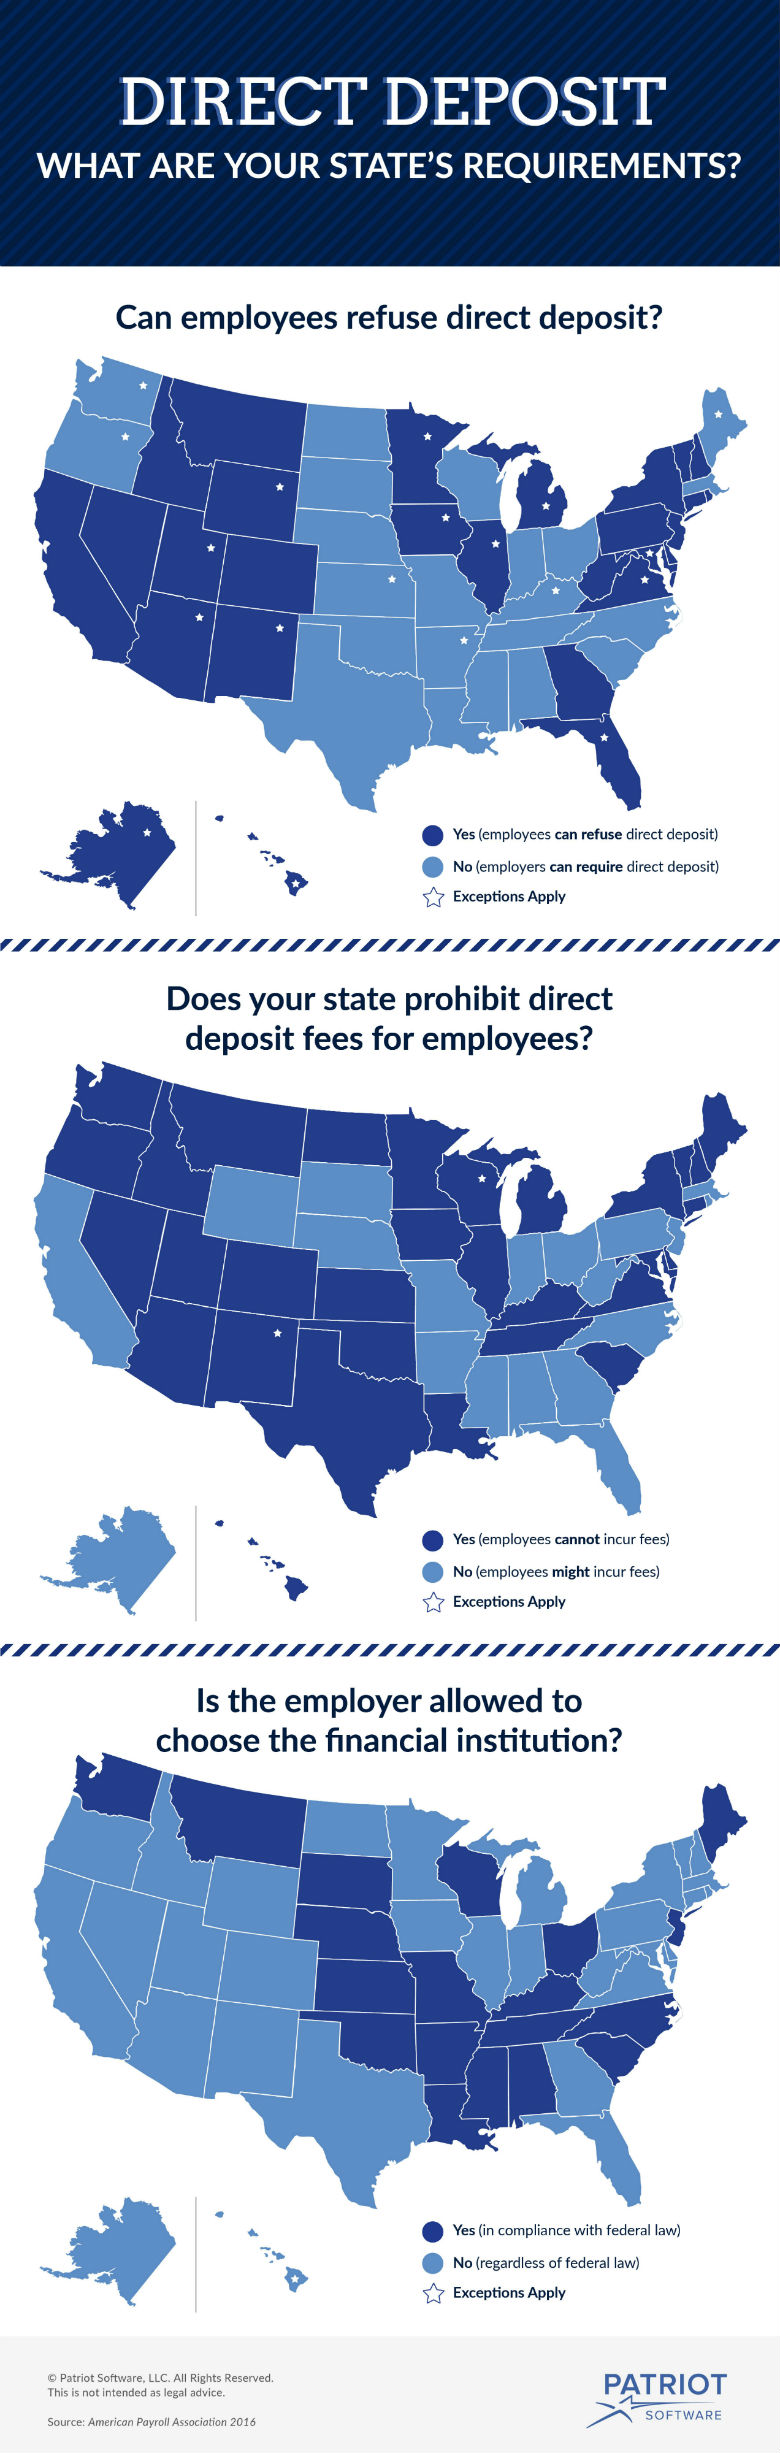 direct deposit requirements by state